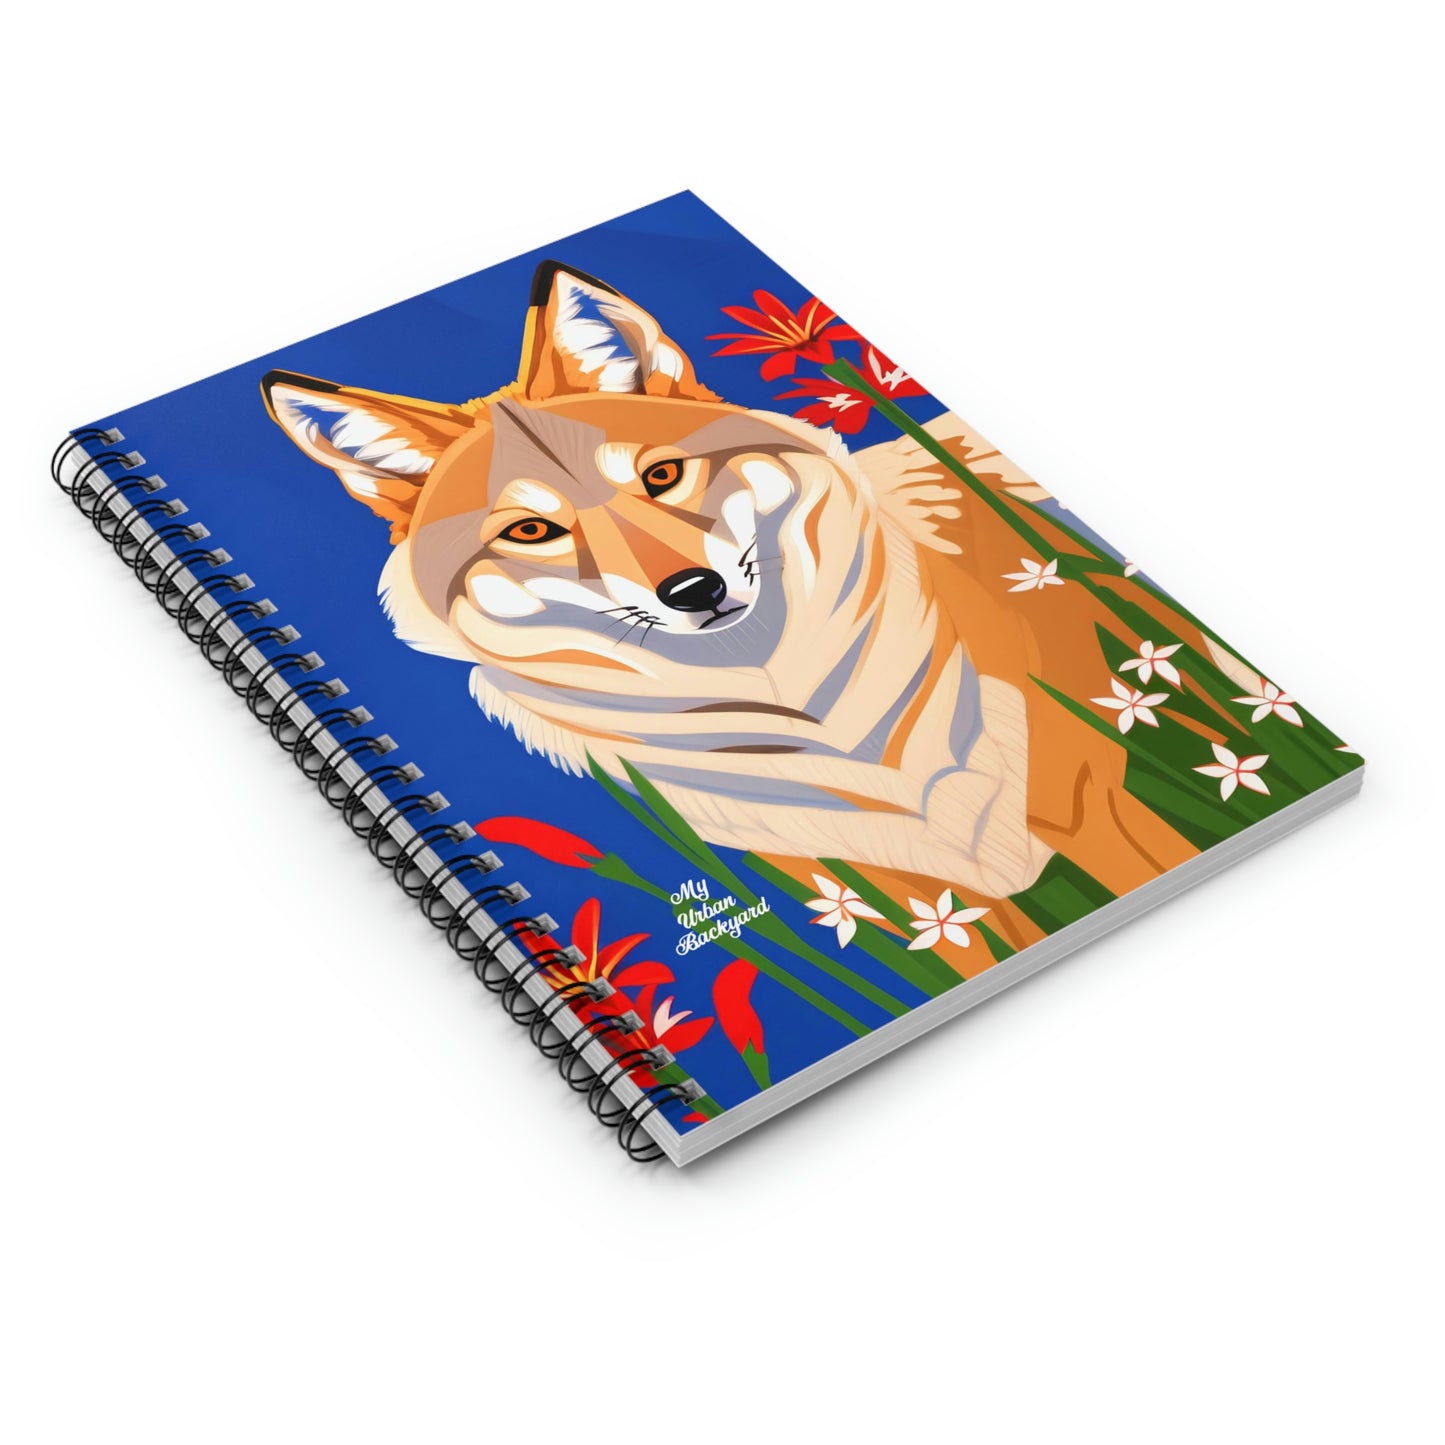 Coyote and Red Flowers, Spiral Notebook Journal - Write in Style